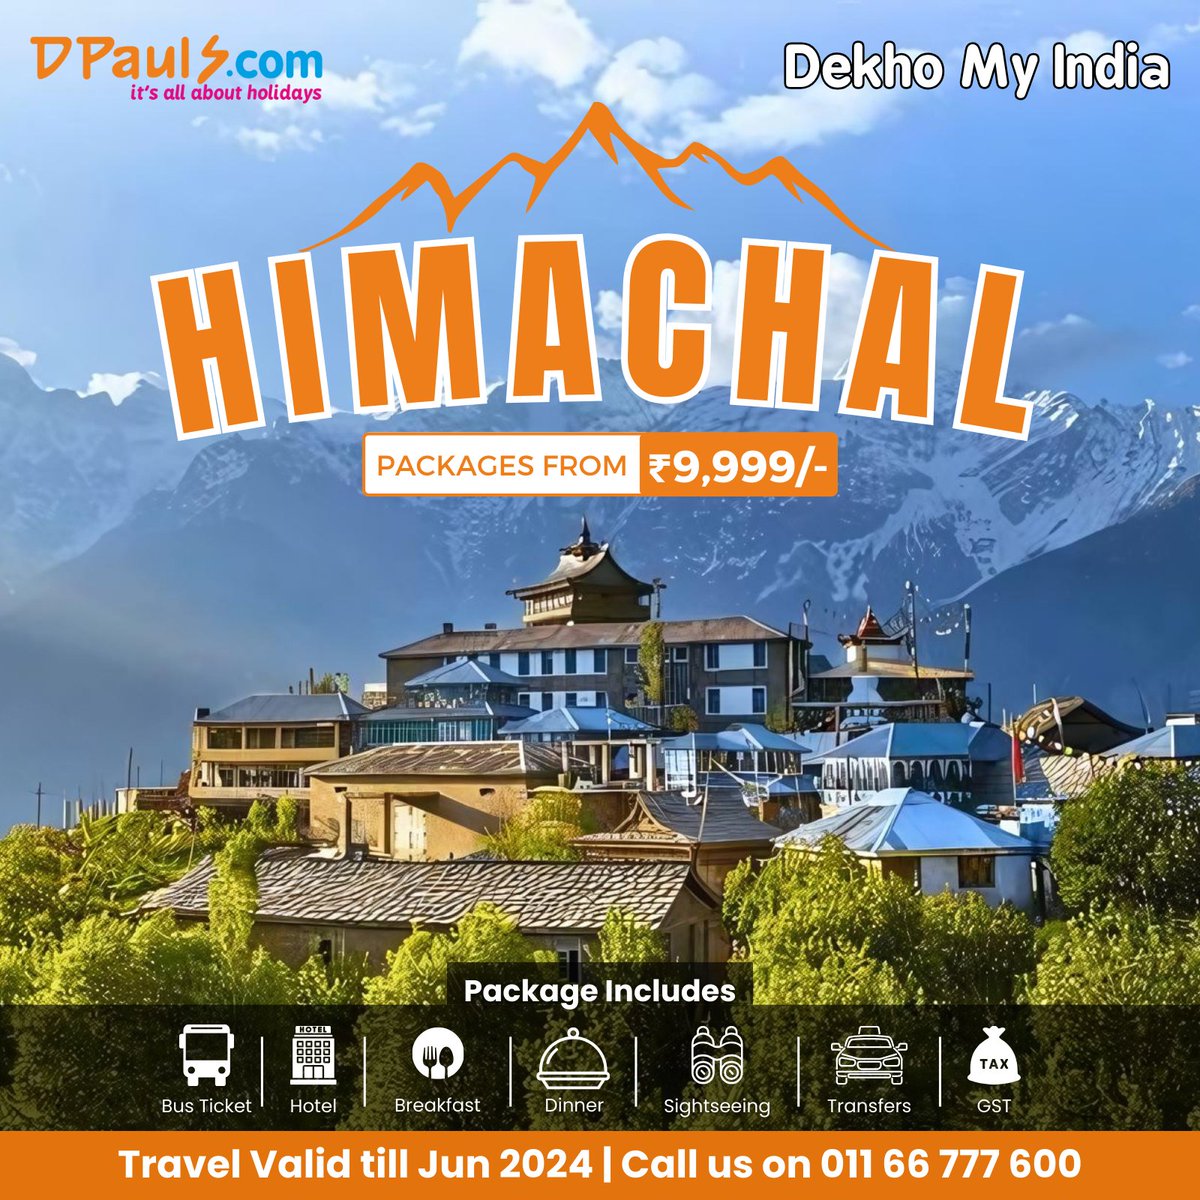 Experience the Magic of Himalayas! Himachal Packages Starting from Rs.9999/-
Your dream mountain getaway is now within reach. Call us at 011-66777600

#DPauls_Travel #Himachal #HimalayanGetaway #HimachalDiaries #HimachalPackages #Manali #Shimla #Dharamshala #Getaway